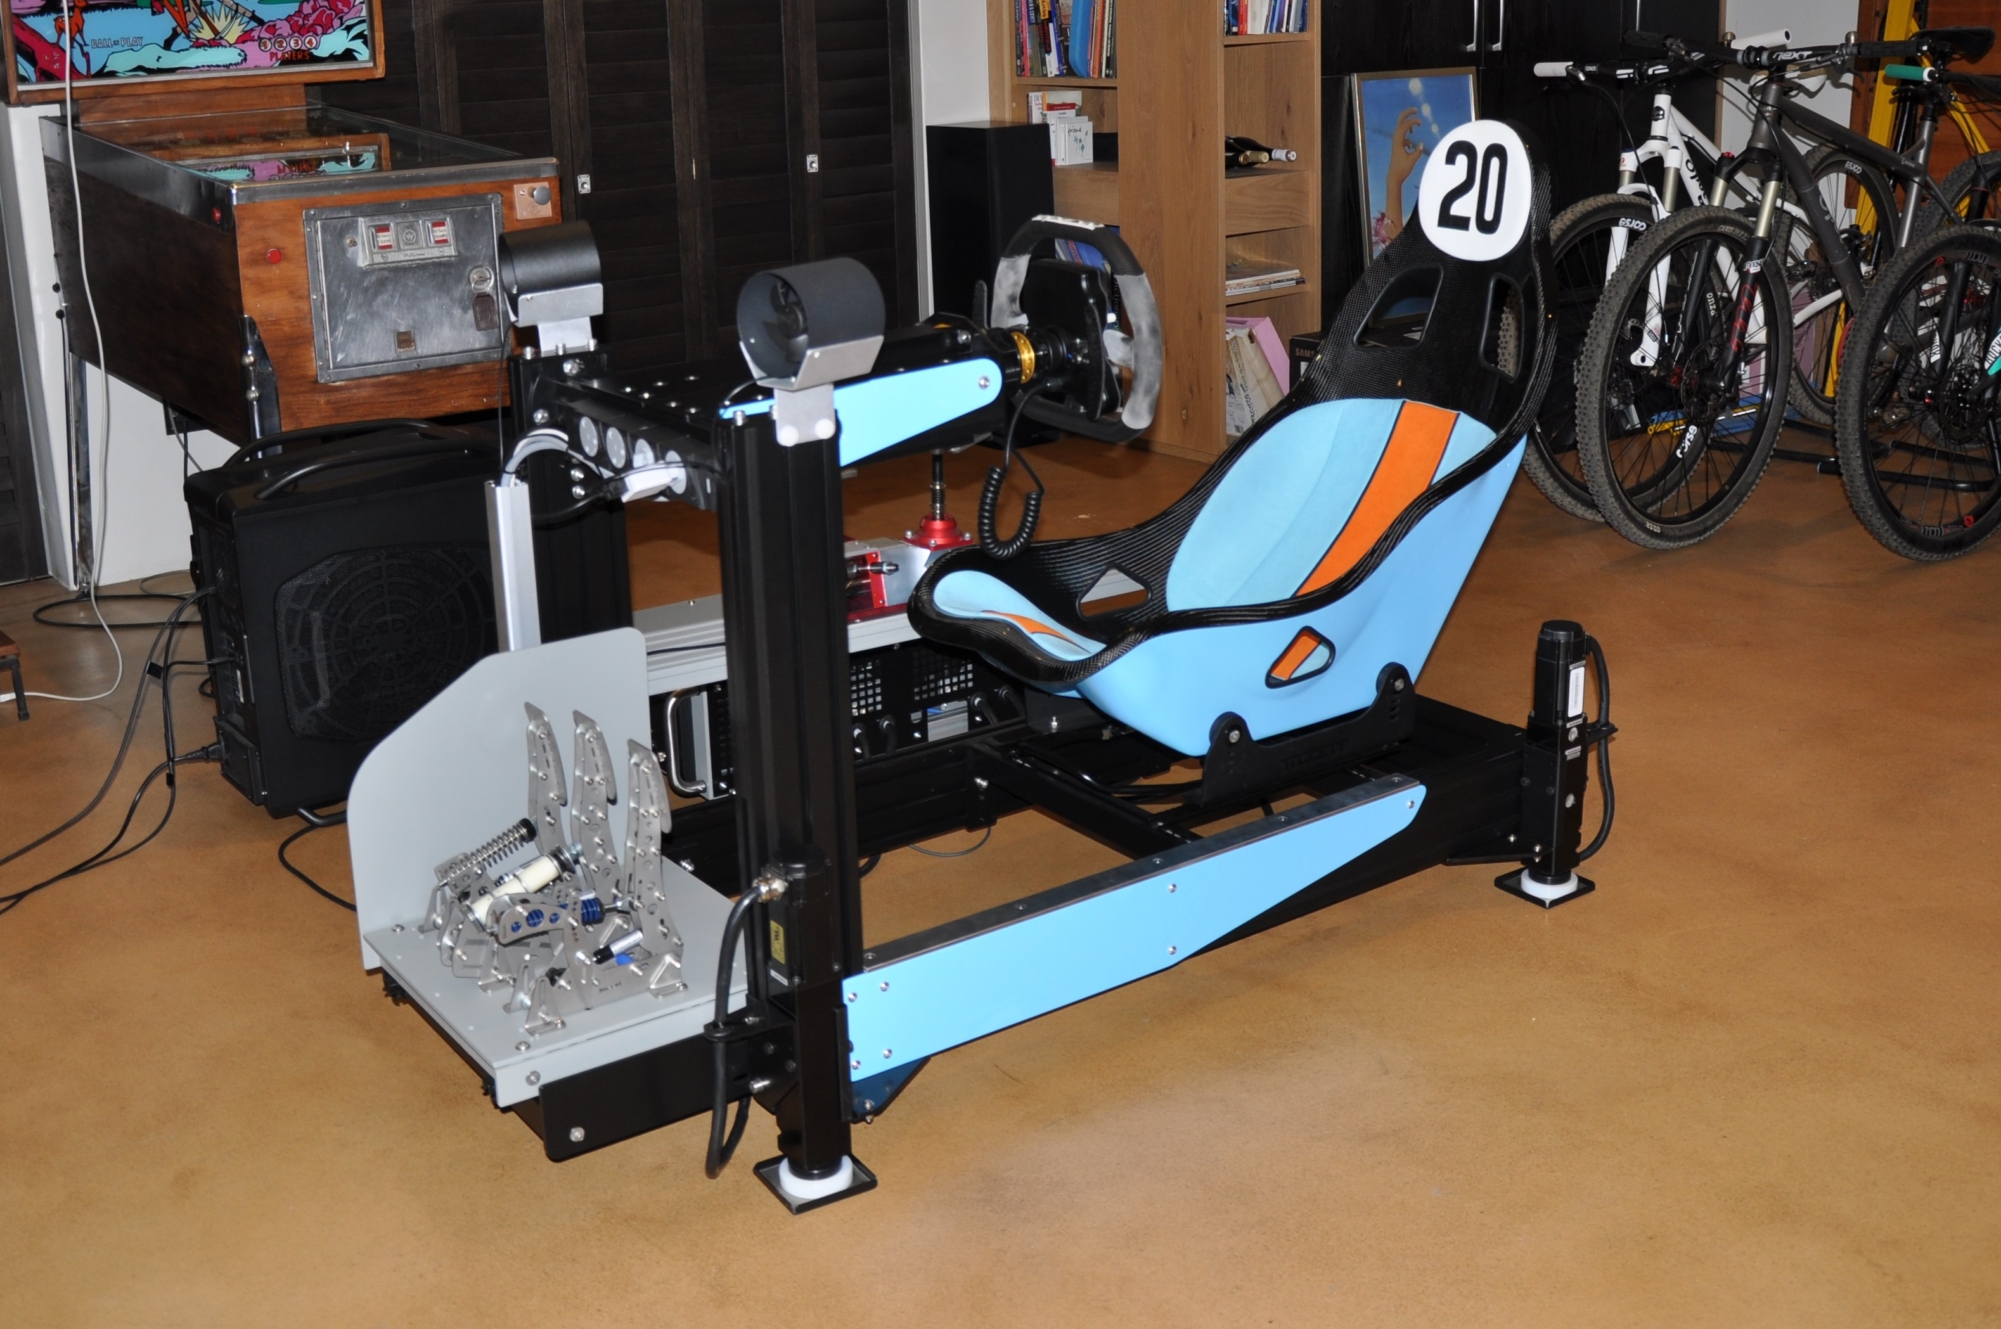 The sim racing motion rig uses Oculus Virtual Reality for the next best thing next to real racing.